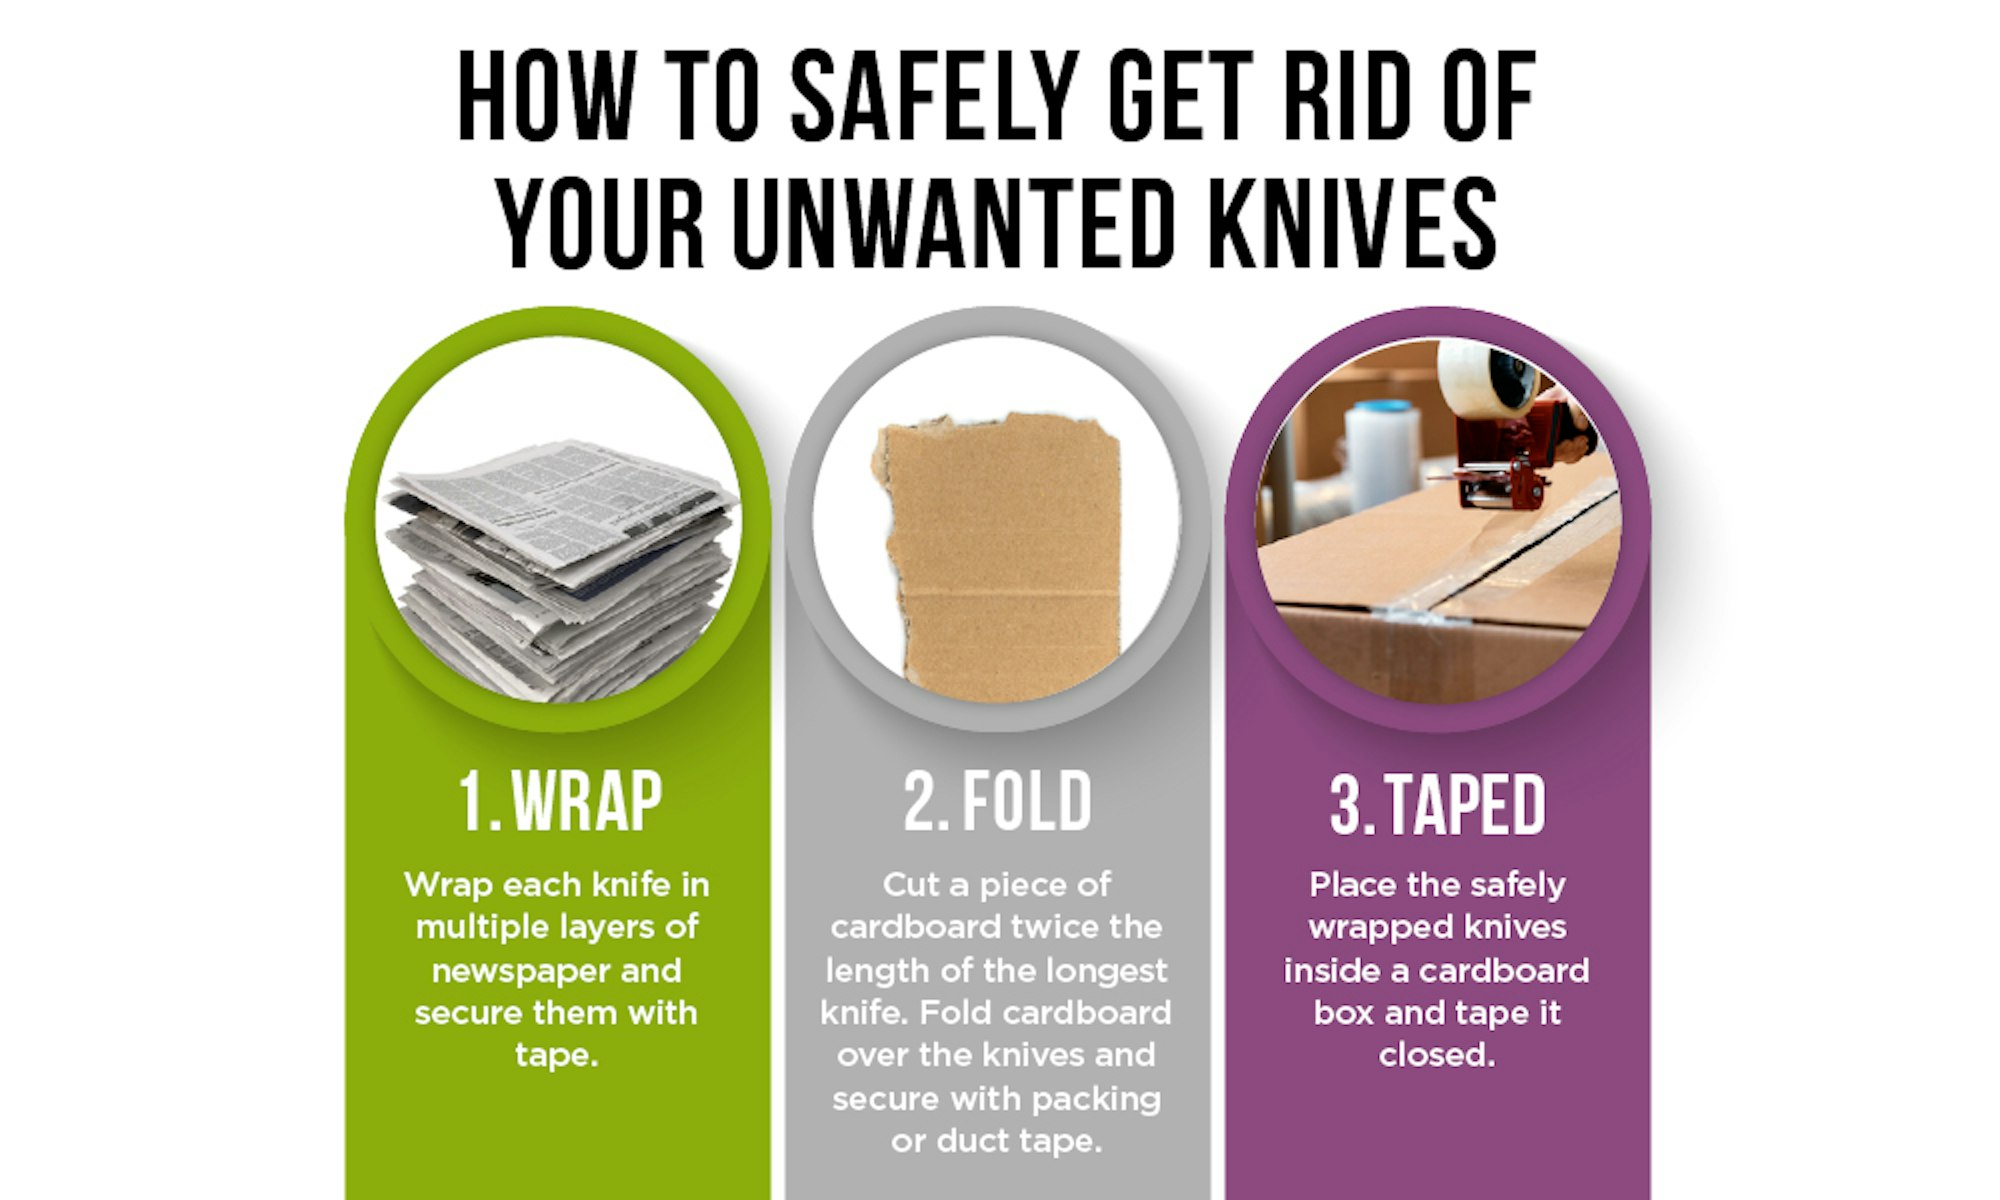 How To Dispose of Old Knives - Kitchen Knife Disposal | House Blog 